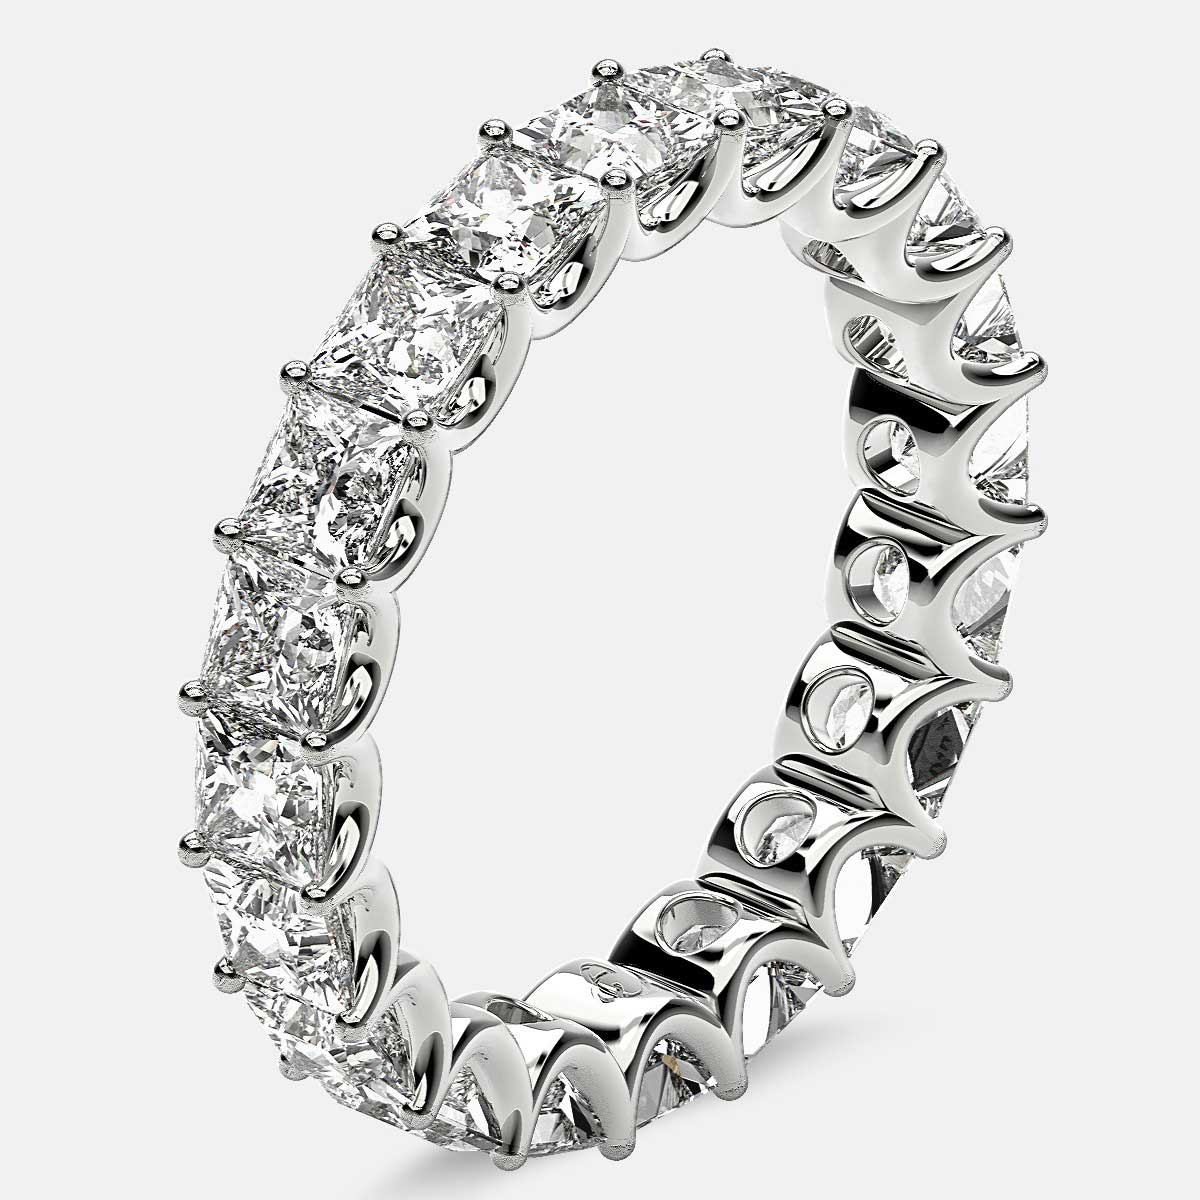 Eternity Ring with Arch Prong Set Princess Diamonds in 18k White Gold